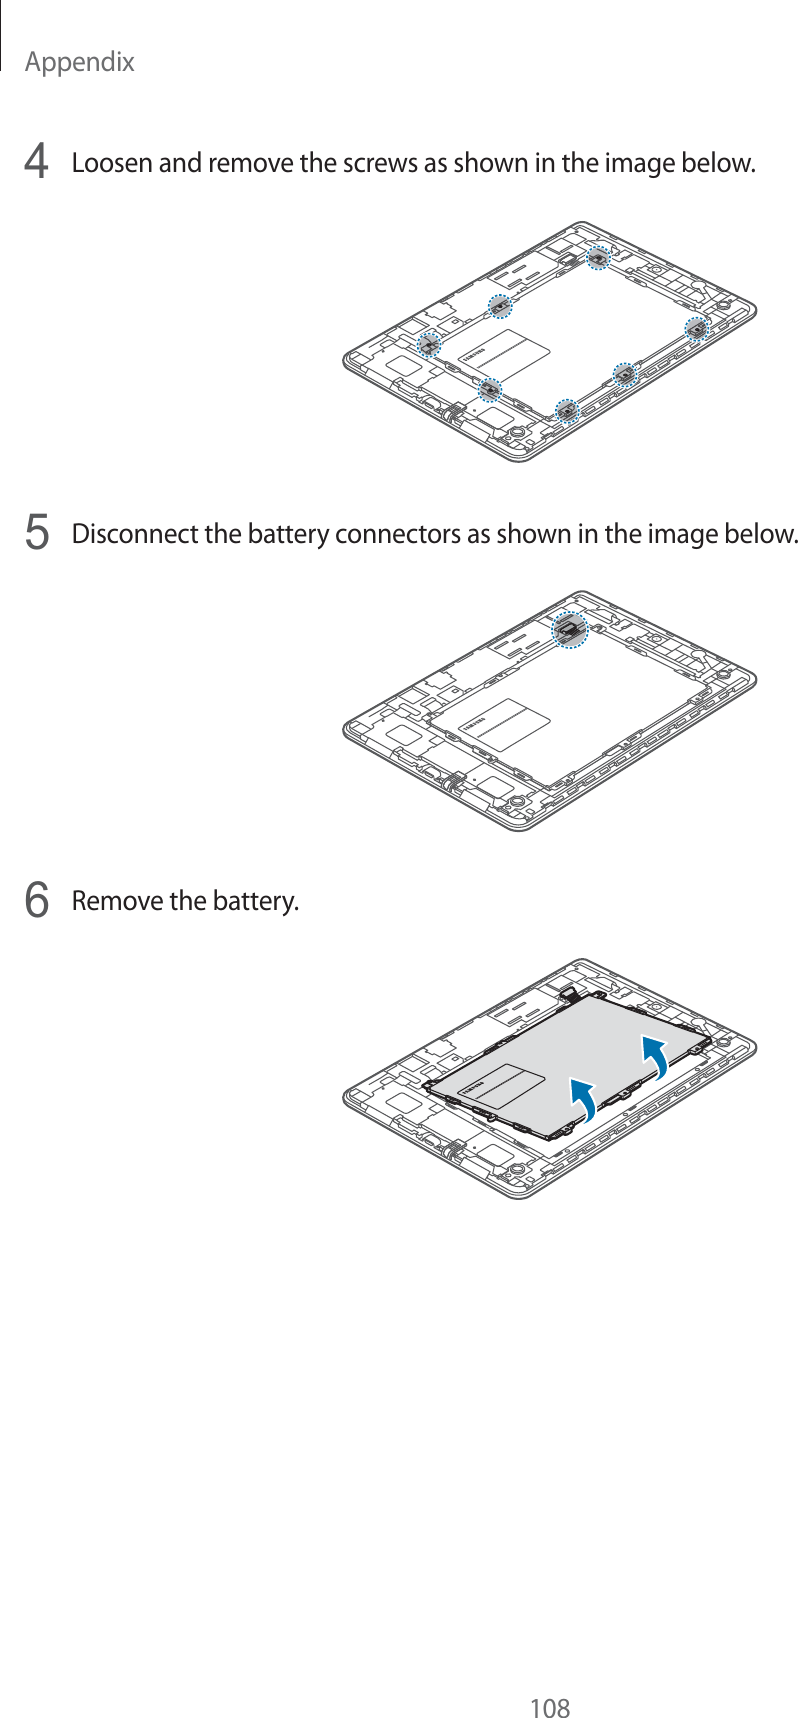 Appendix1084Loosen and remove the screws as shown in the image below.5Disconnect the battery connectors as shown in the image below.6Remove the battery.